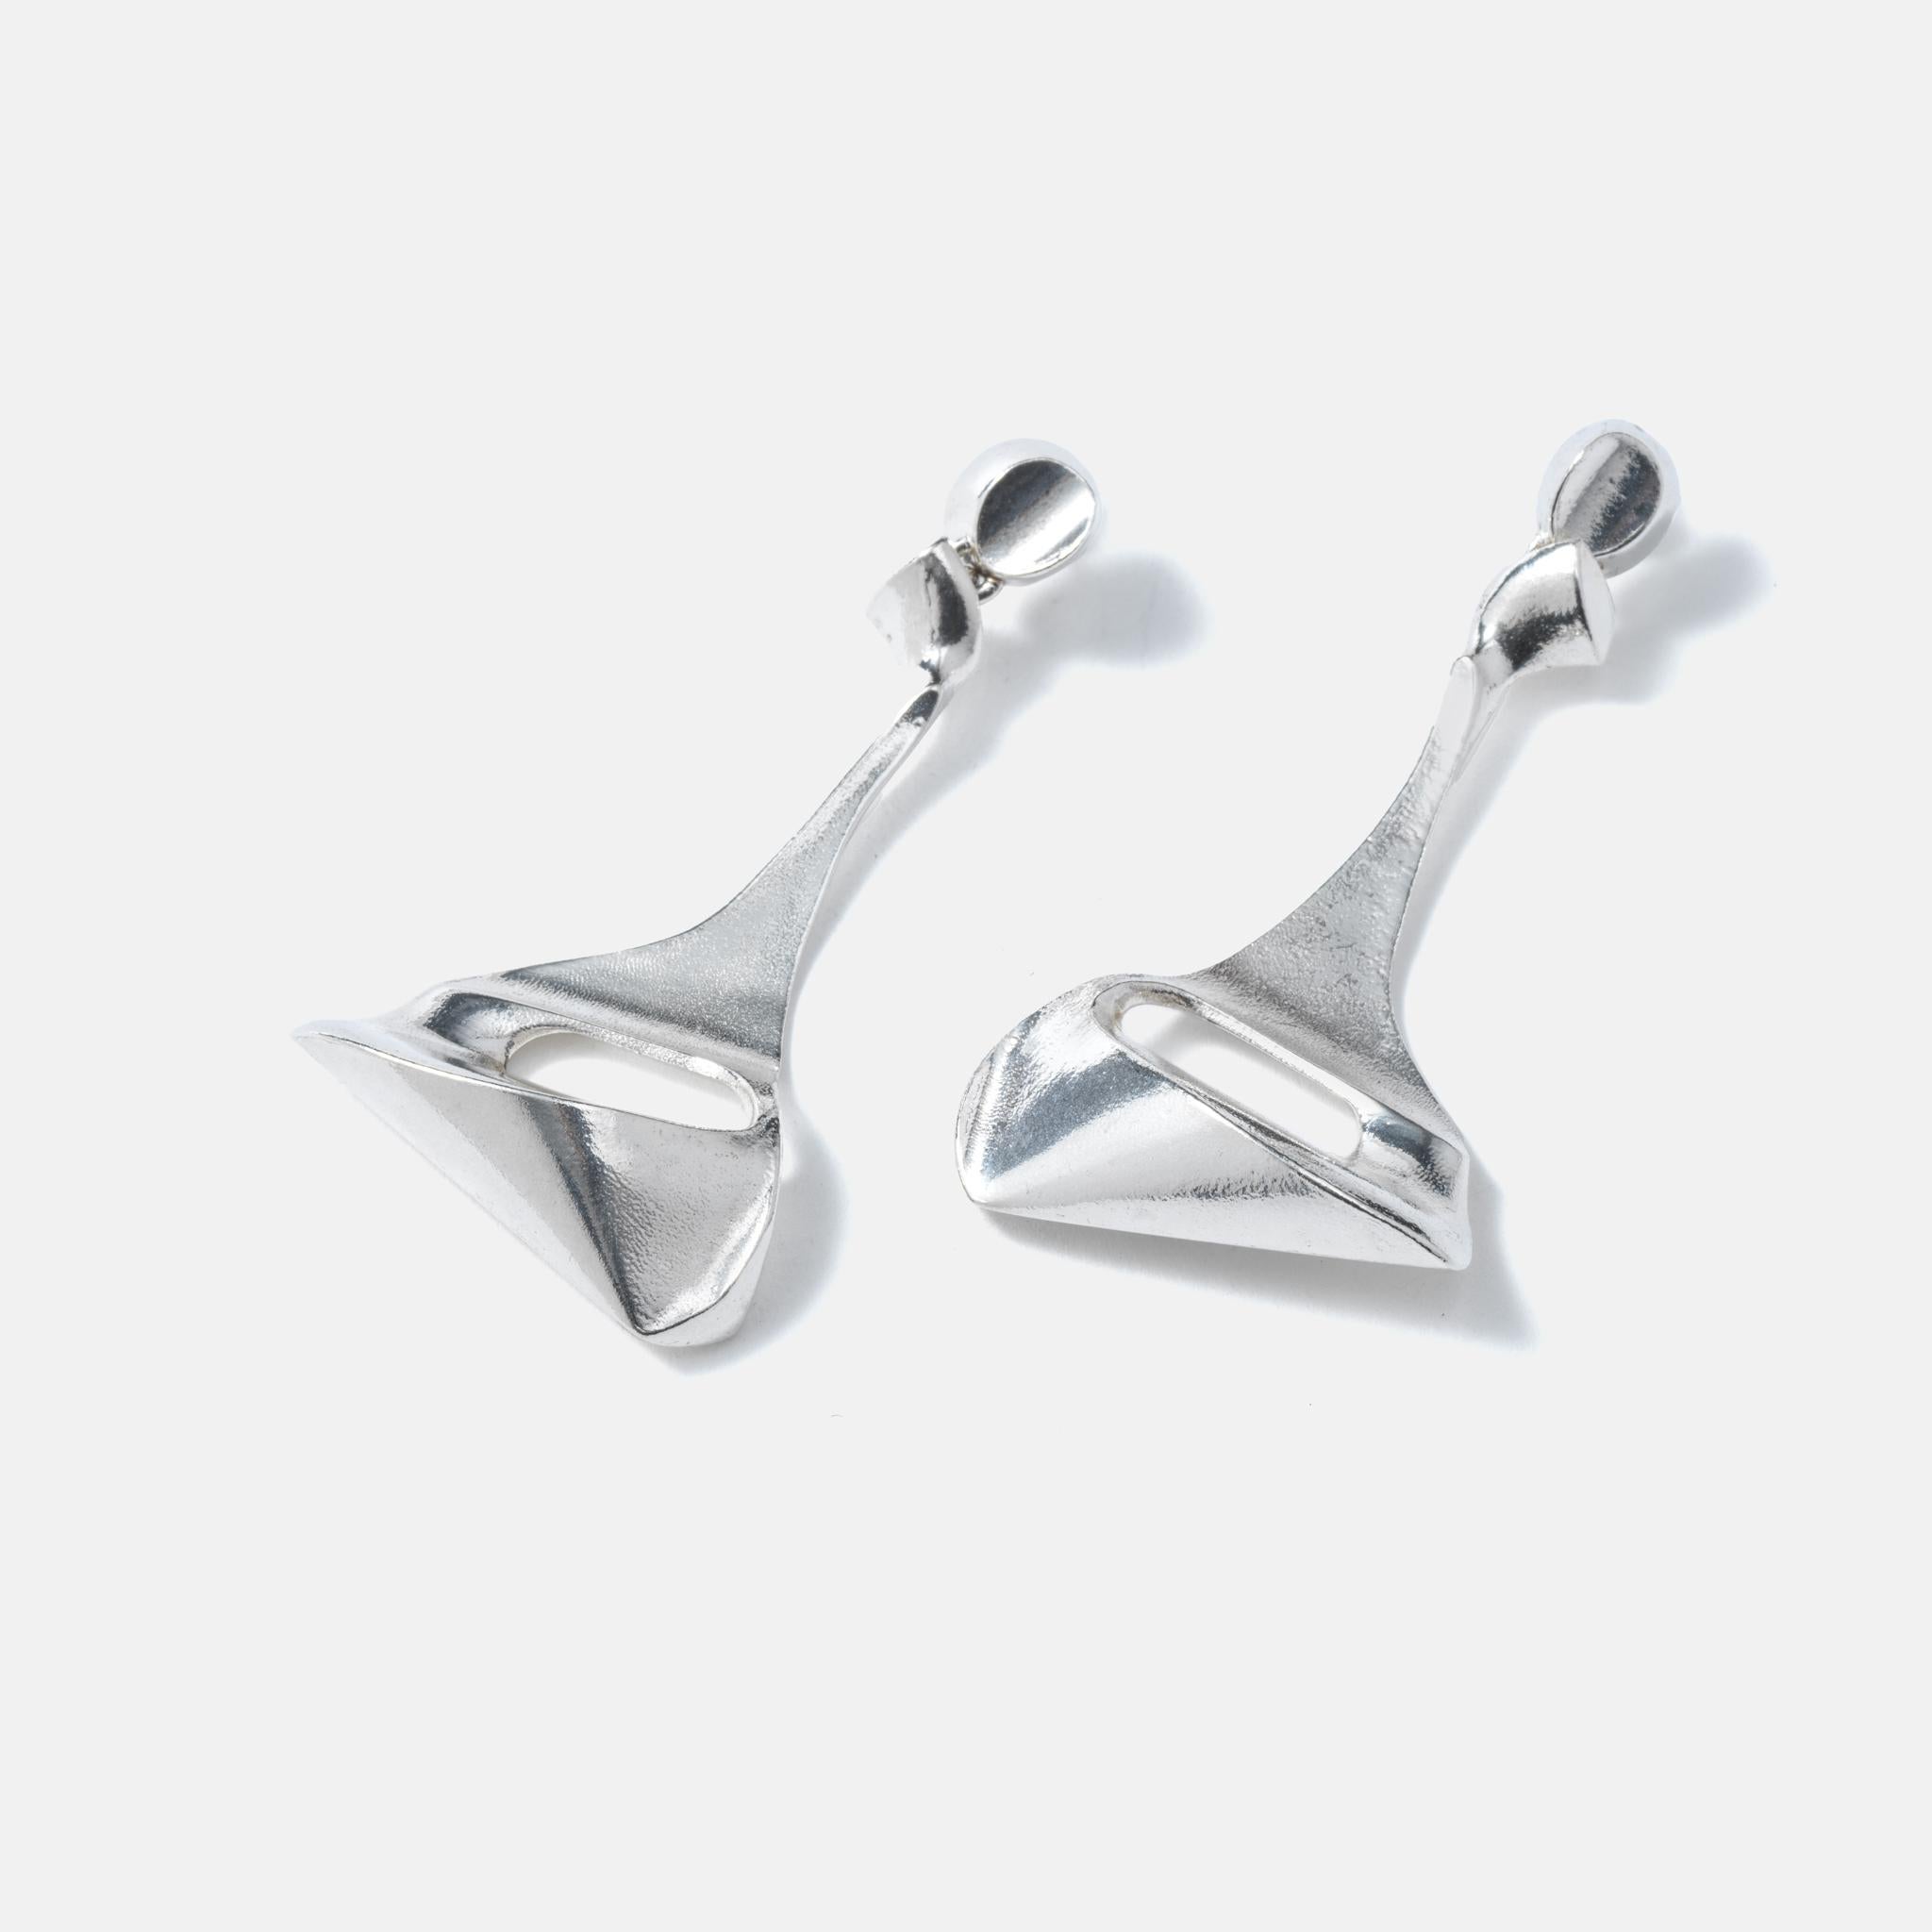 Large, powerful and beautiful is what categorises these earrings. Manhattan they are called and they are designed by Finlands foremost jewelry designer, Björn Weckström. These earrings will make a statement and will look fantastic on anybody, woman